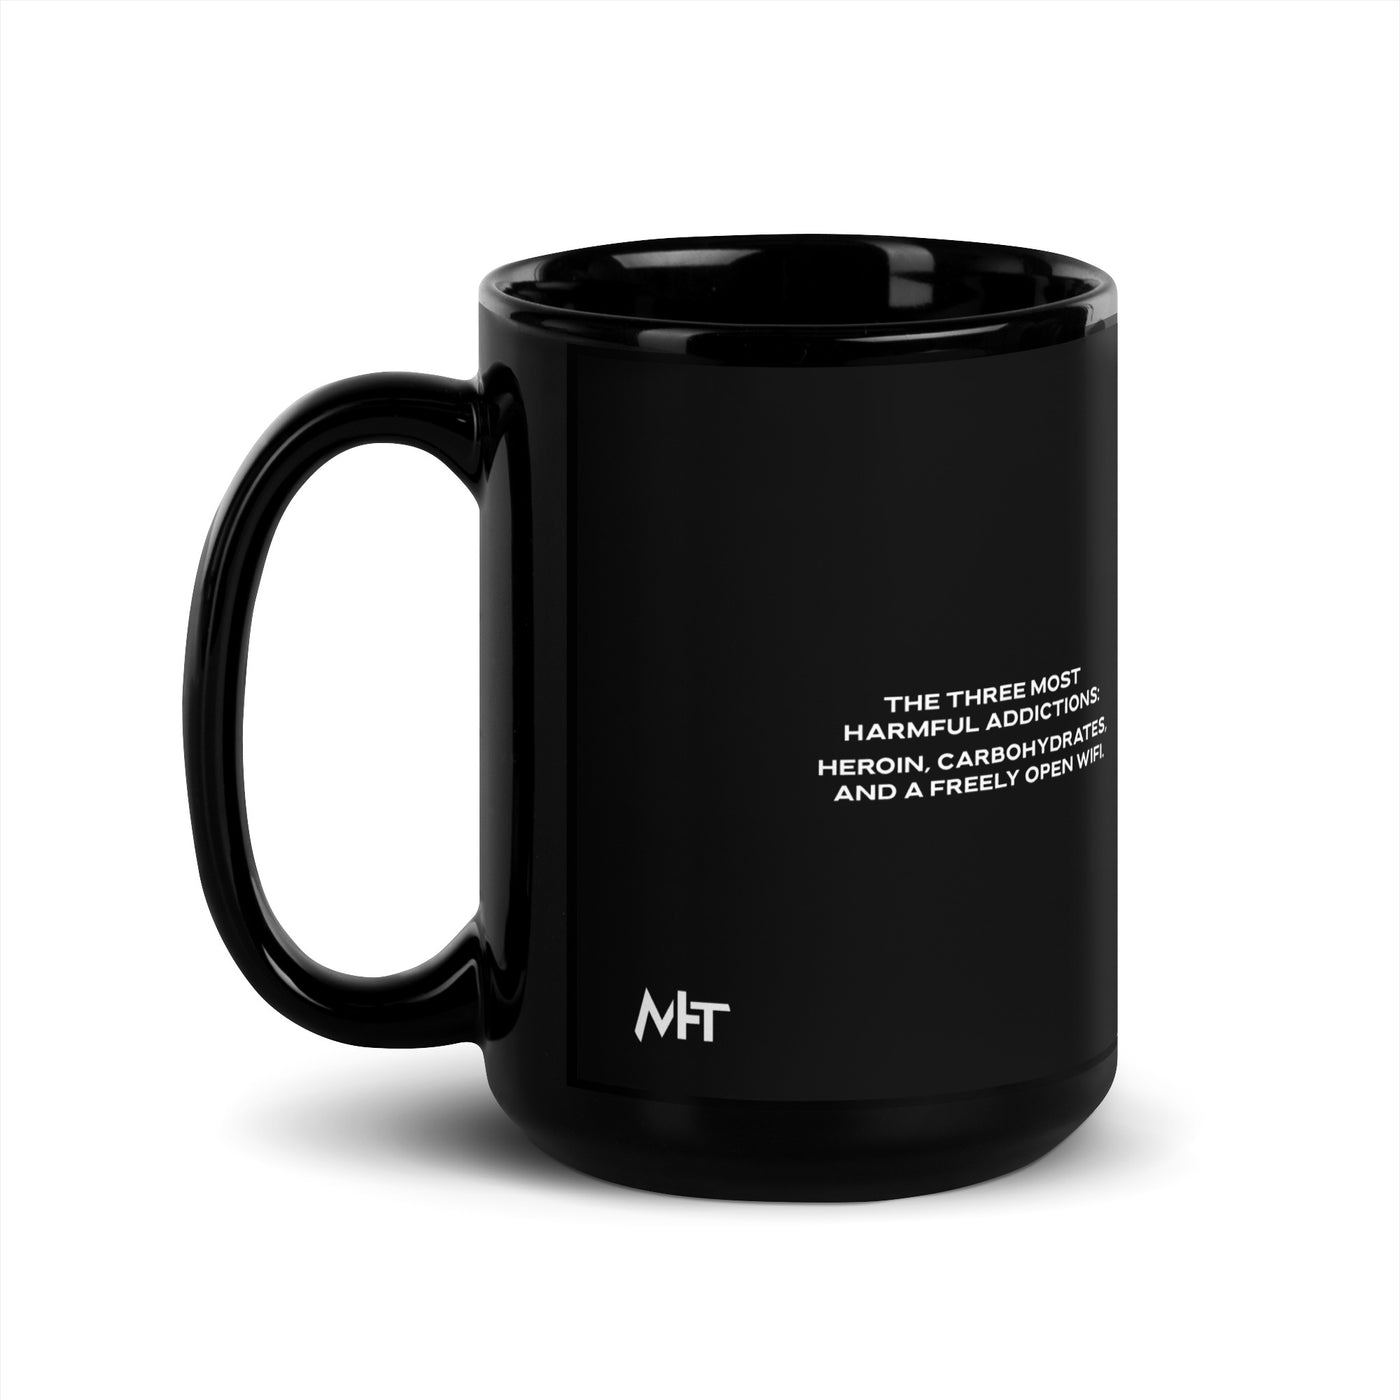 The three most harmful addictions heroin, carbohydrates and a freely open WiFi V2 - Black Glossy Mug